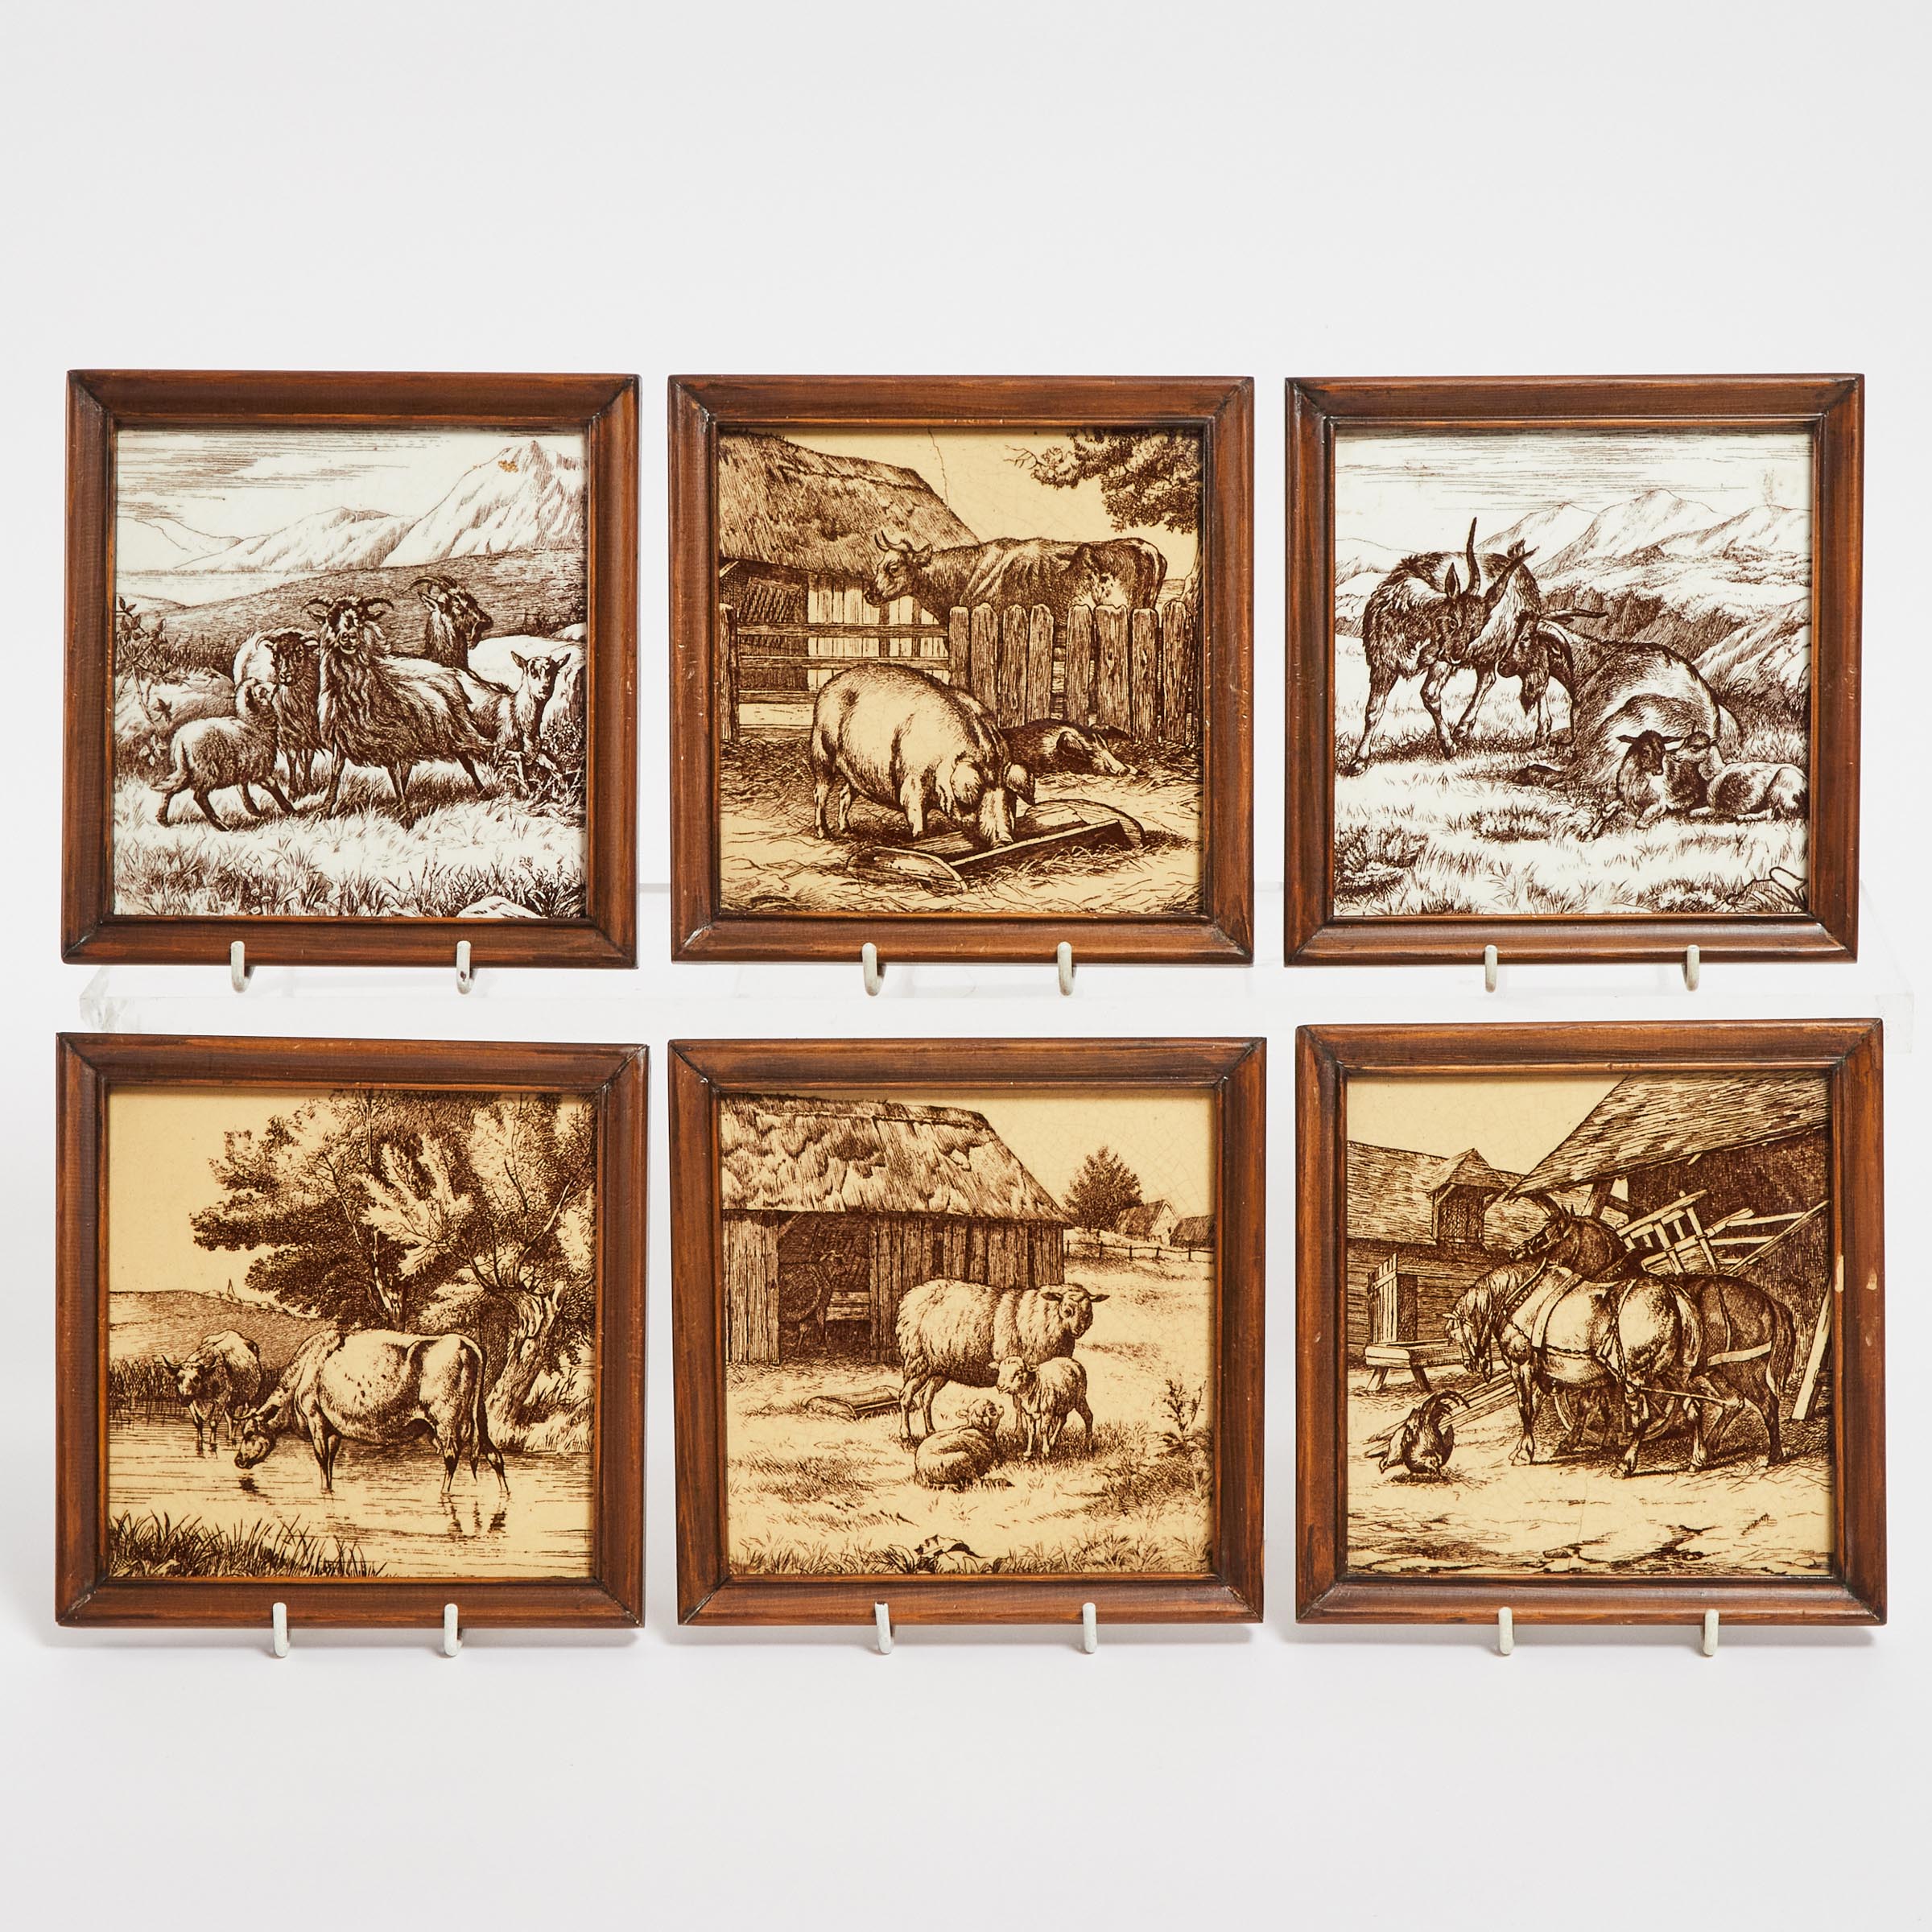 Six Framed Porcelain Tiles, Minton China Works, c.1880, height 6.8 in — 17.2 cm (6 Pieces)